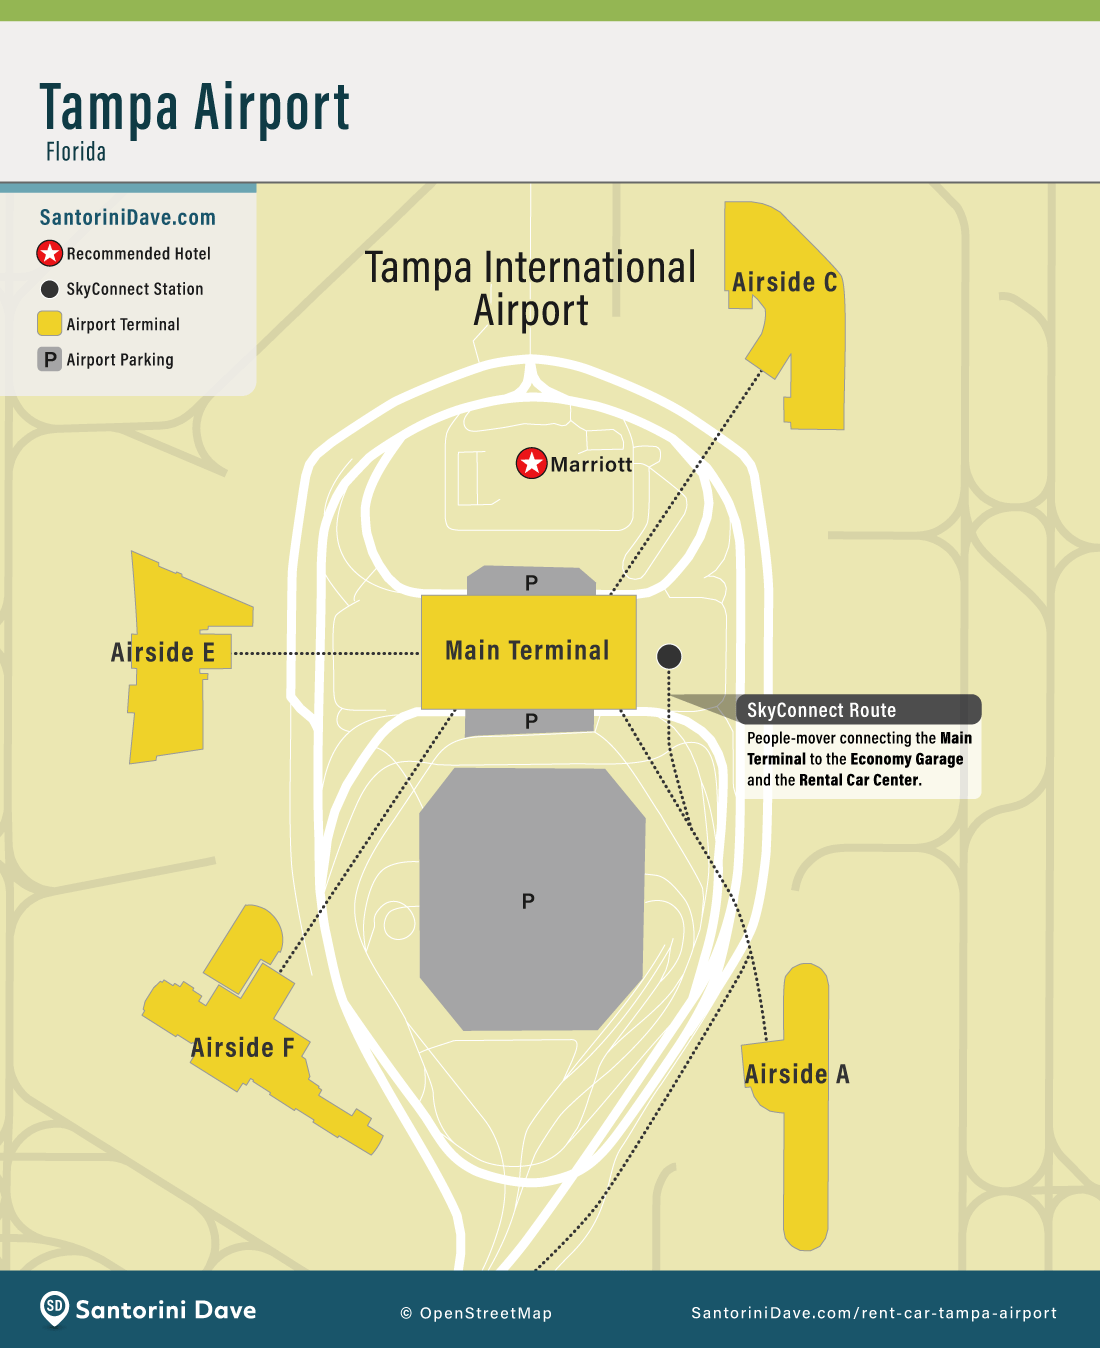 A map showing Tampa airport terminals, SkyConnect station, the Marriott, and parking.